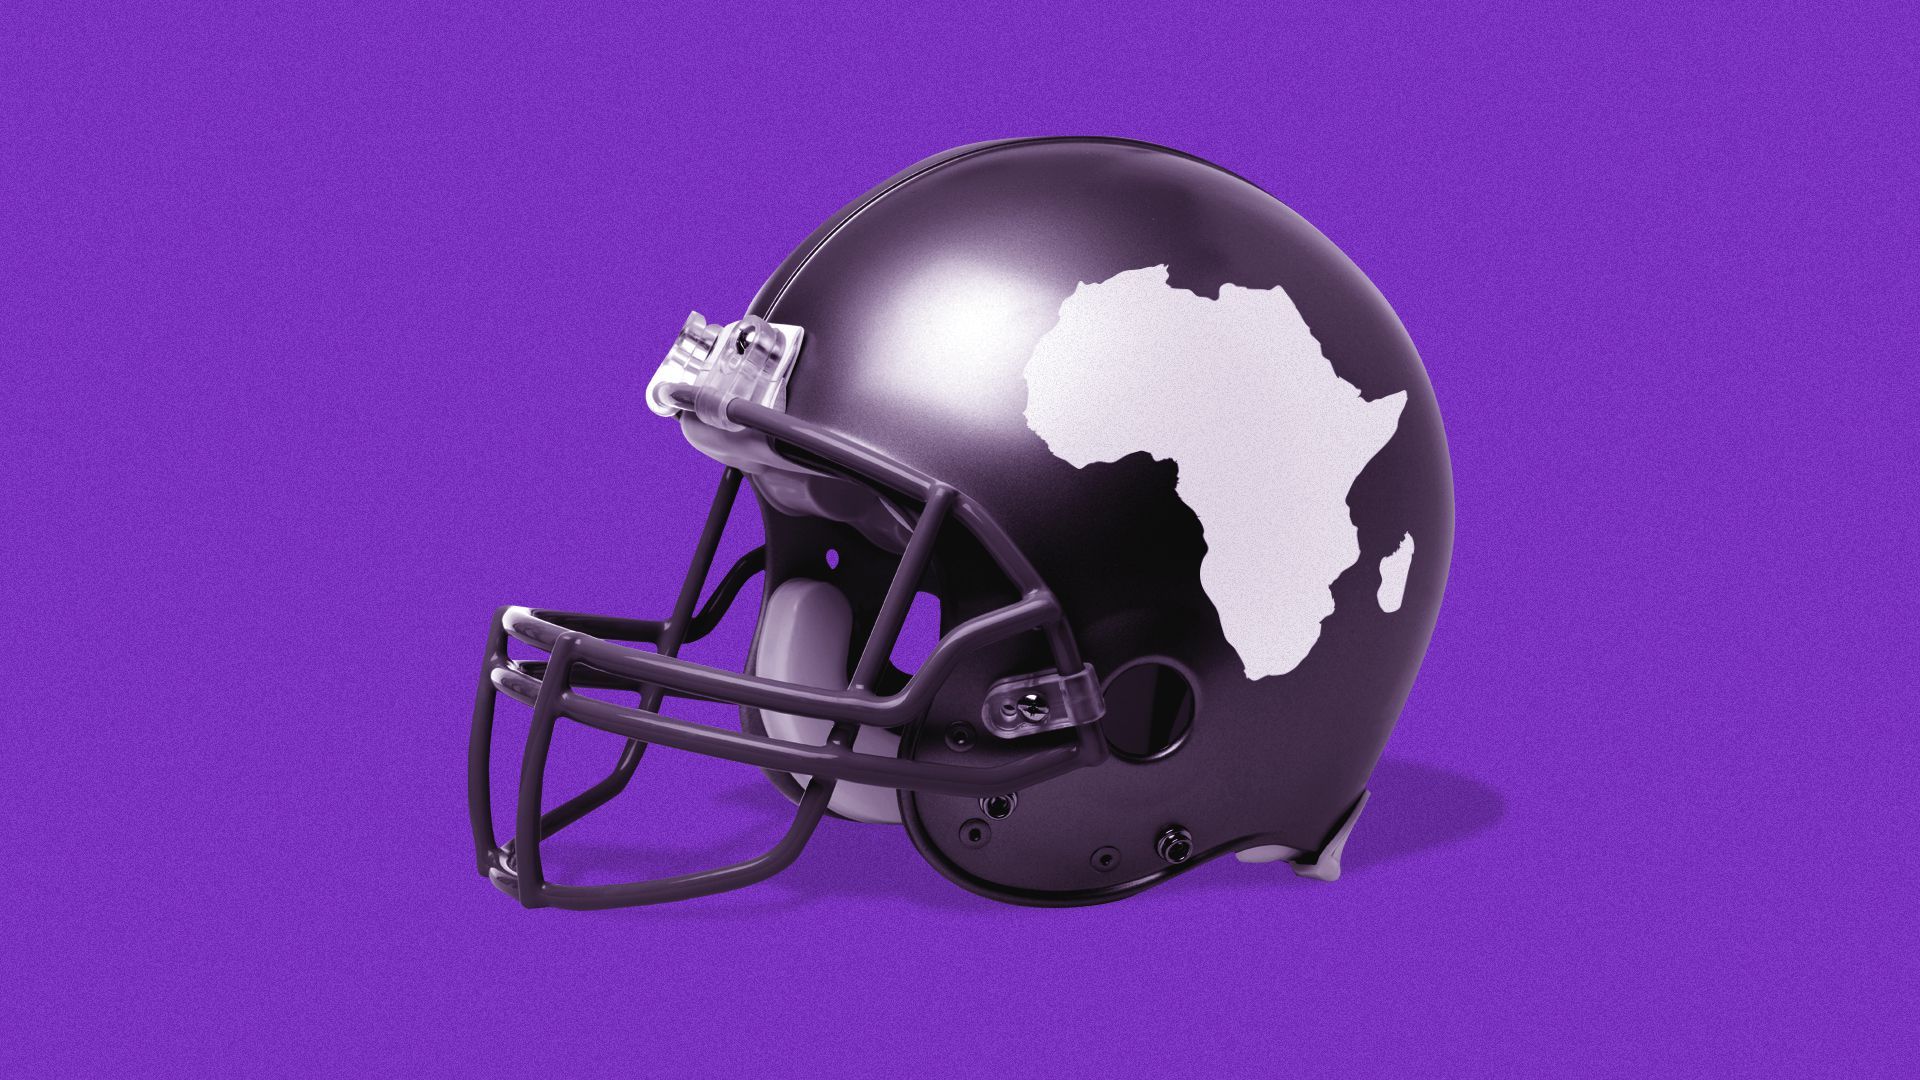 Illustration of a football helmet with the continent of Africa on it